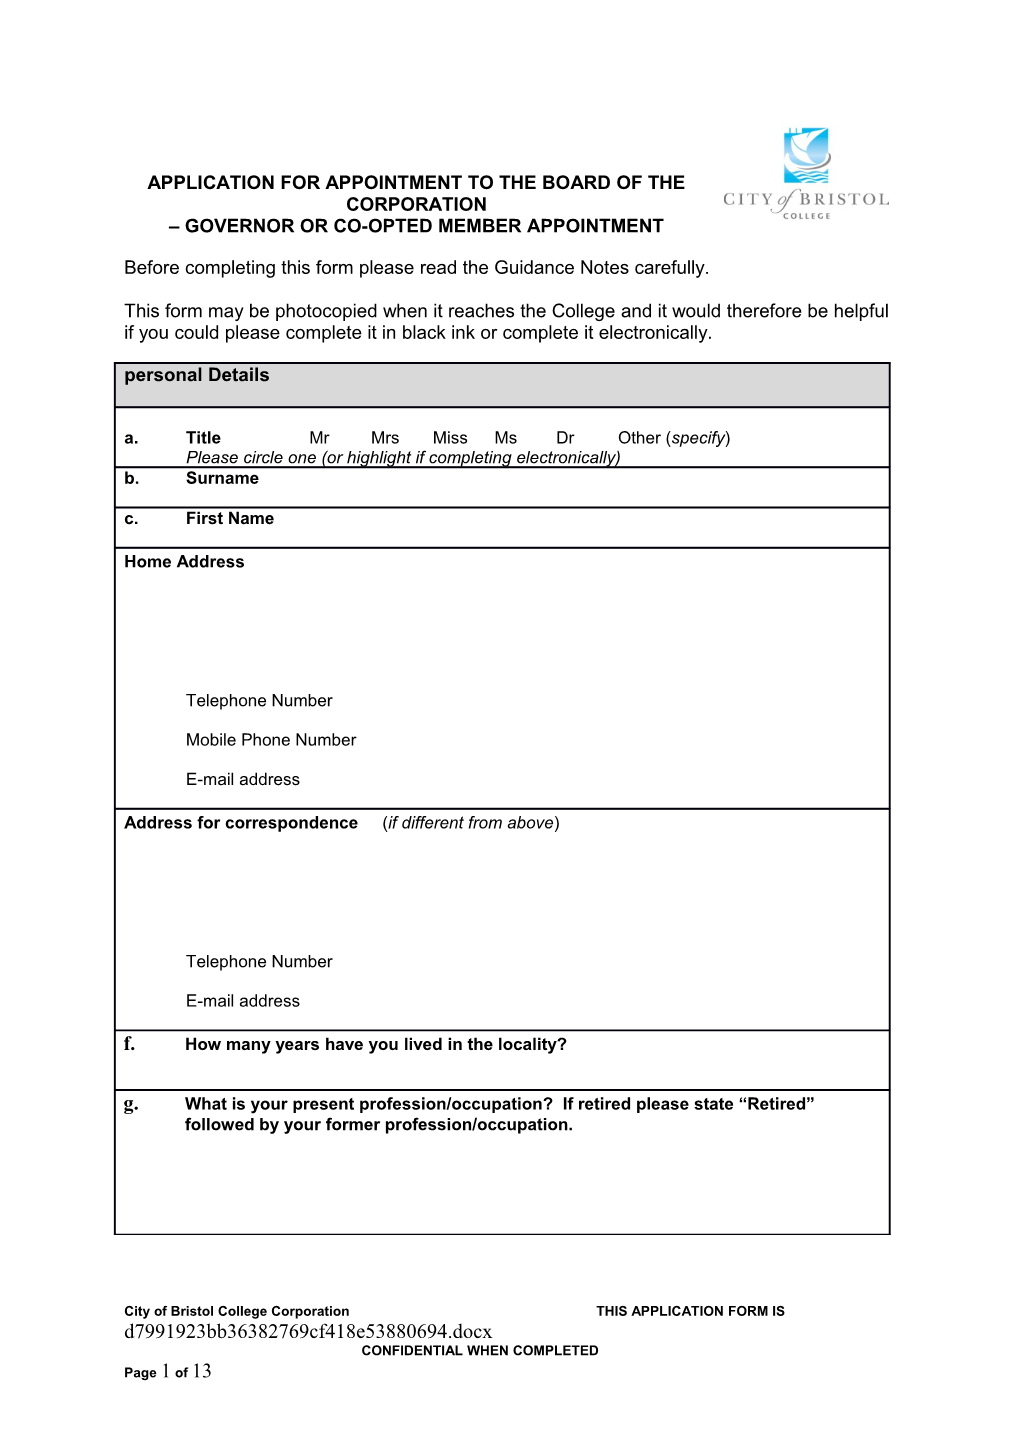 Application for Appointment to the Board of the Corporation